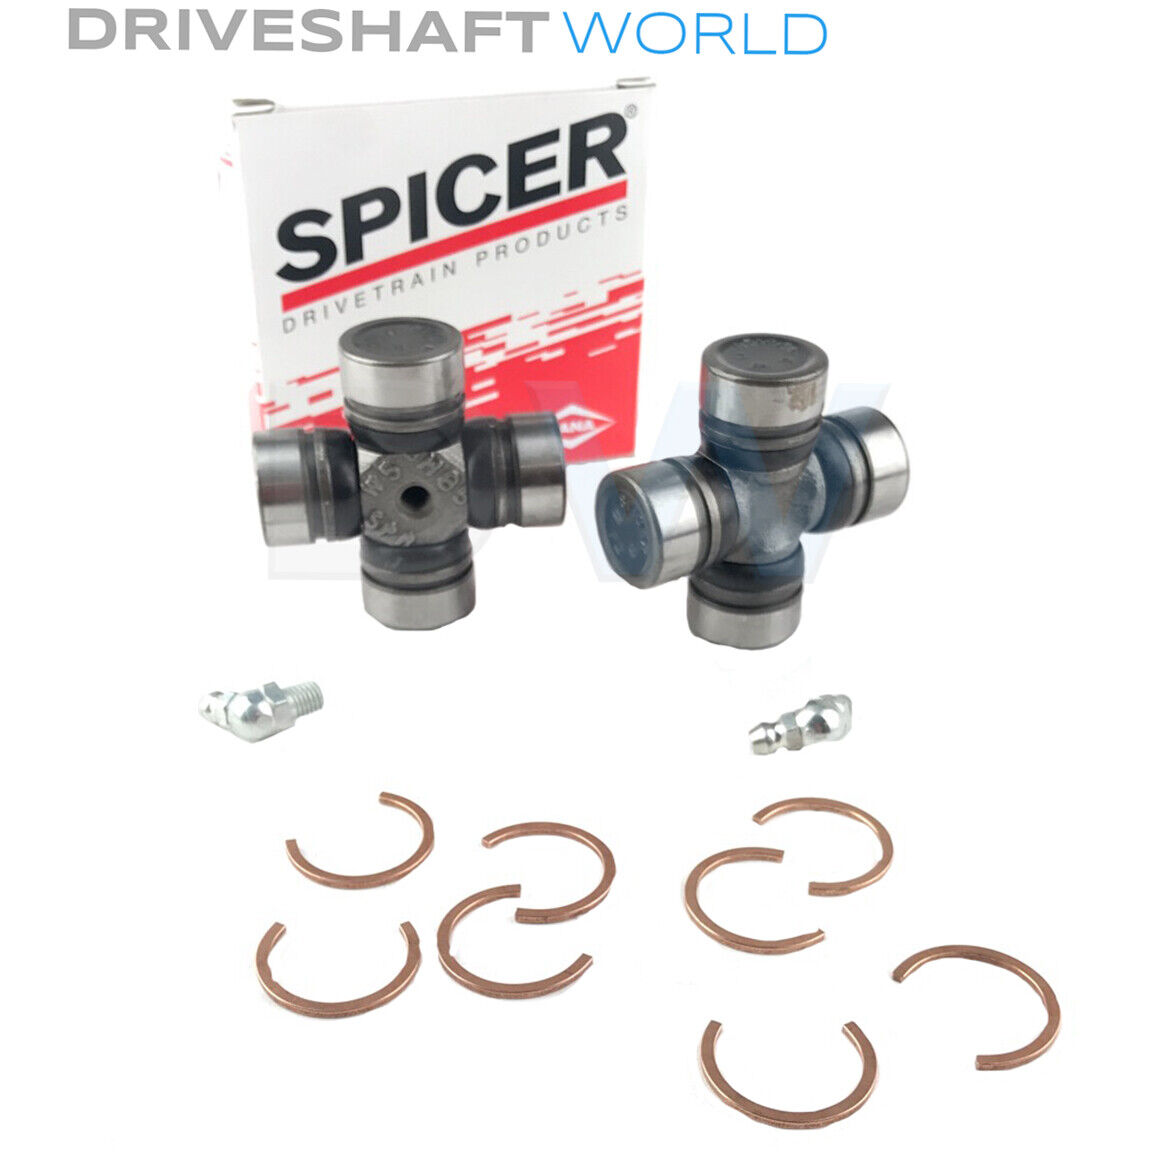 Dana Spicer 1000 Series 5-170X Set of 2 Universal Joint